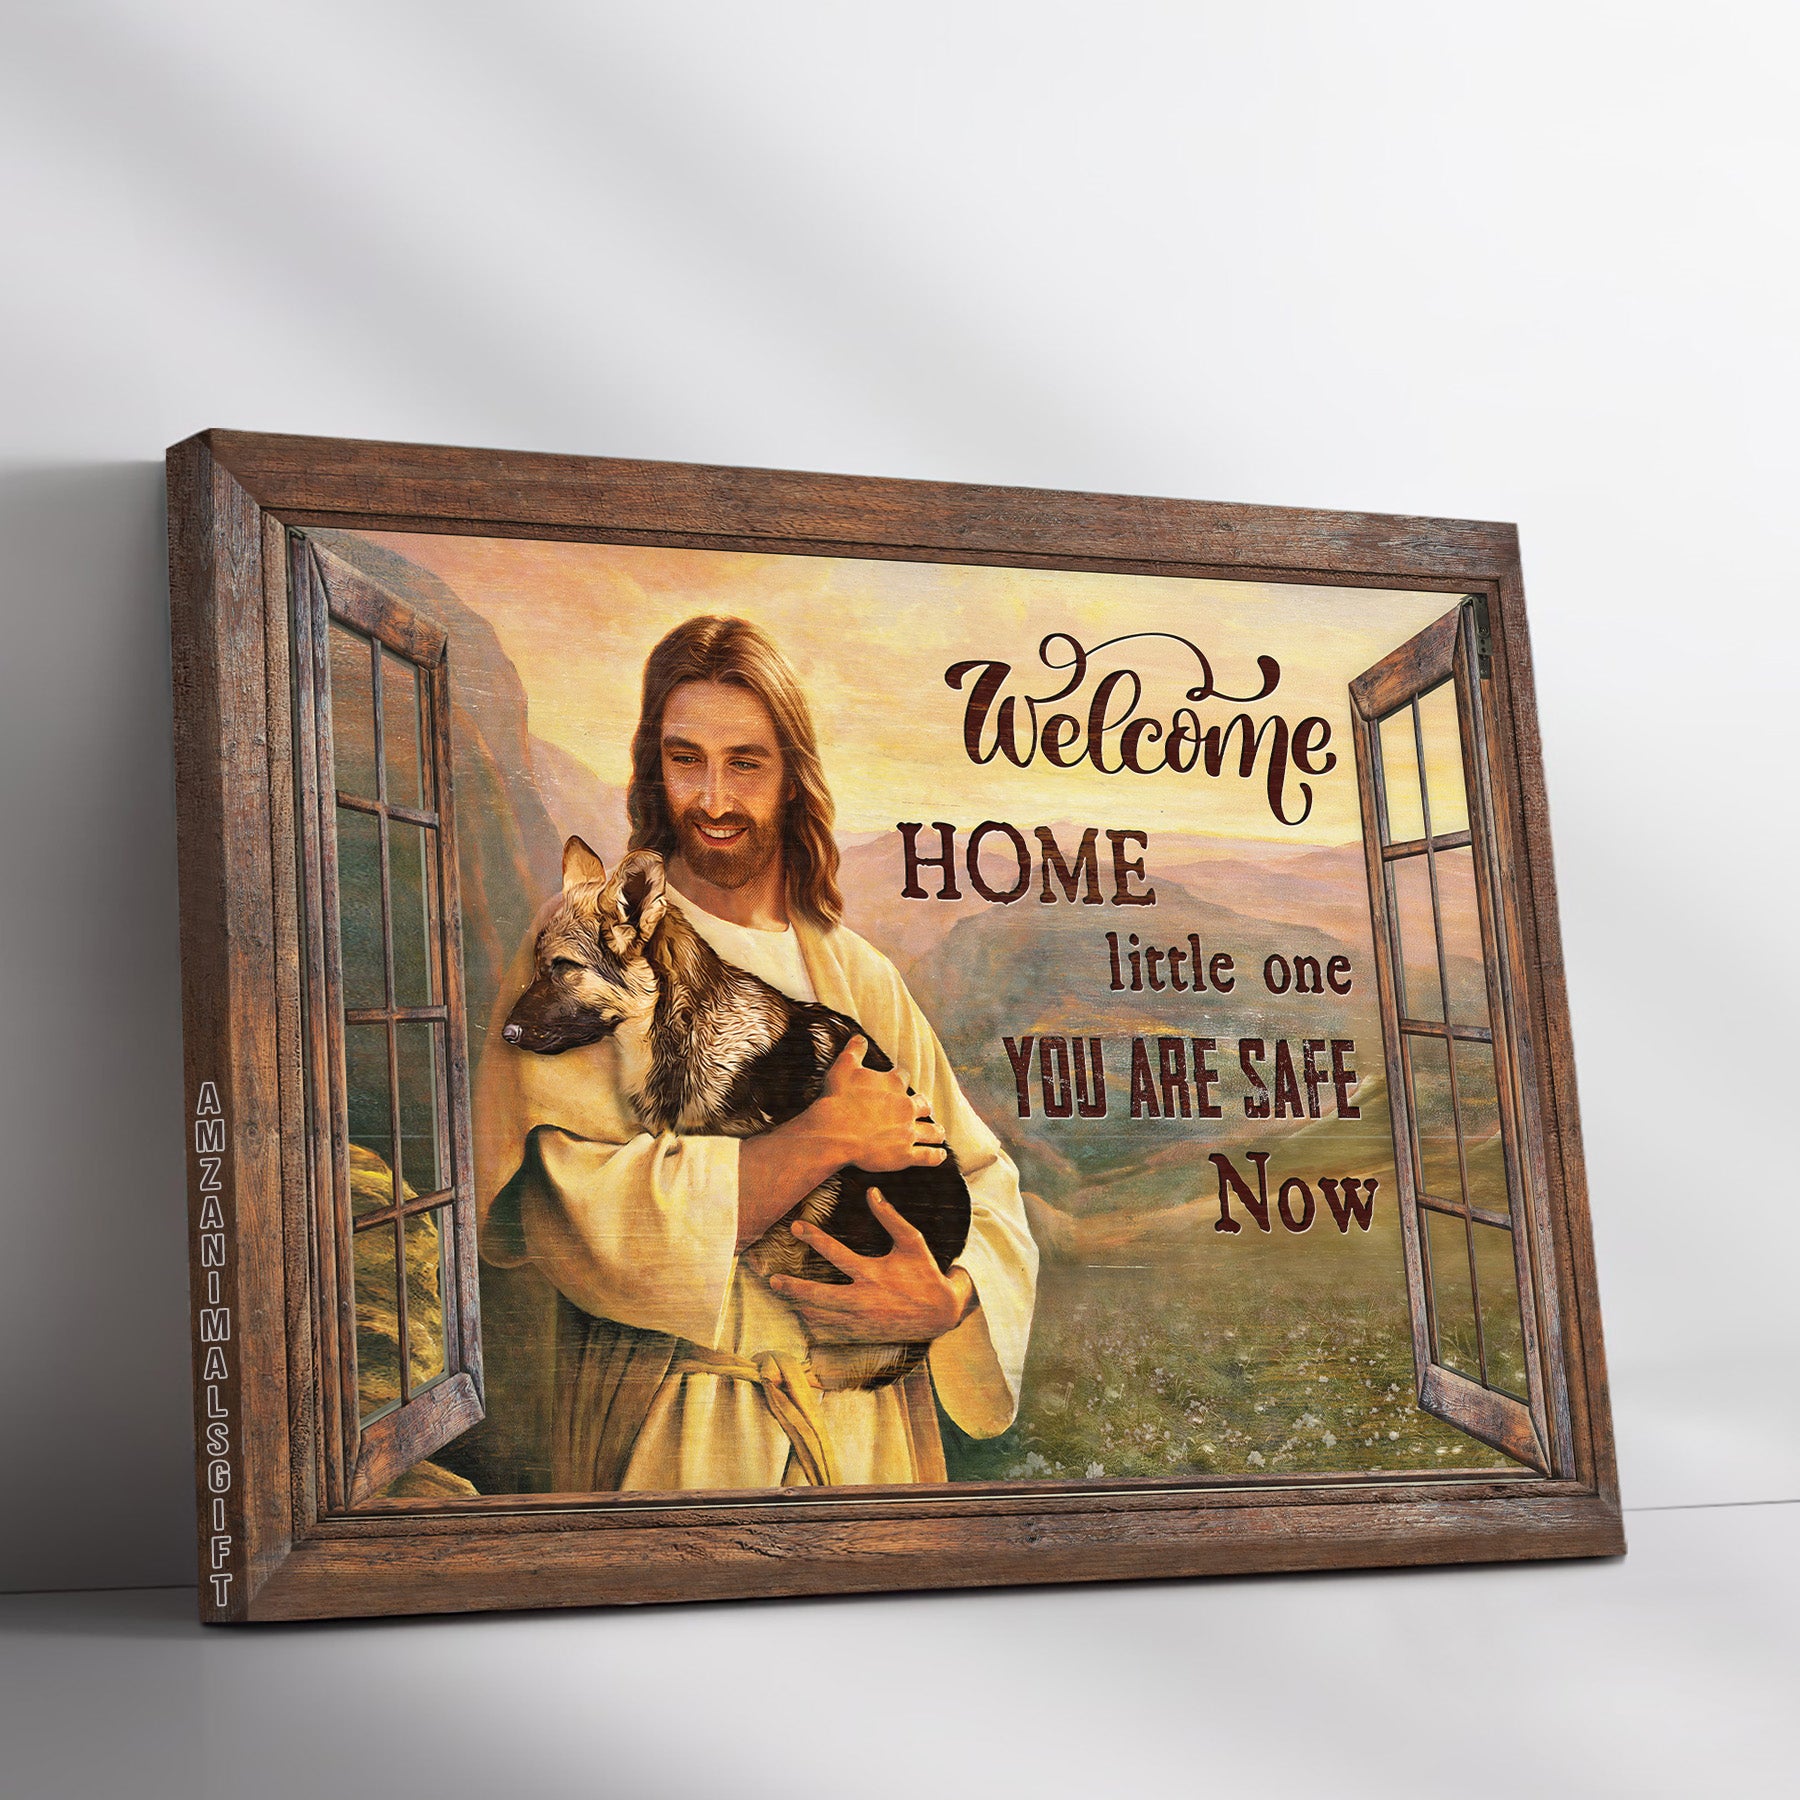 German Shepherd & Jesus Premium Wrapped Landscape Canvas - Safe In The Arms Of Jesus, German Shepherd Dog, Welcome Home - Gift For Christian